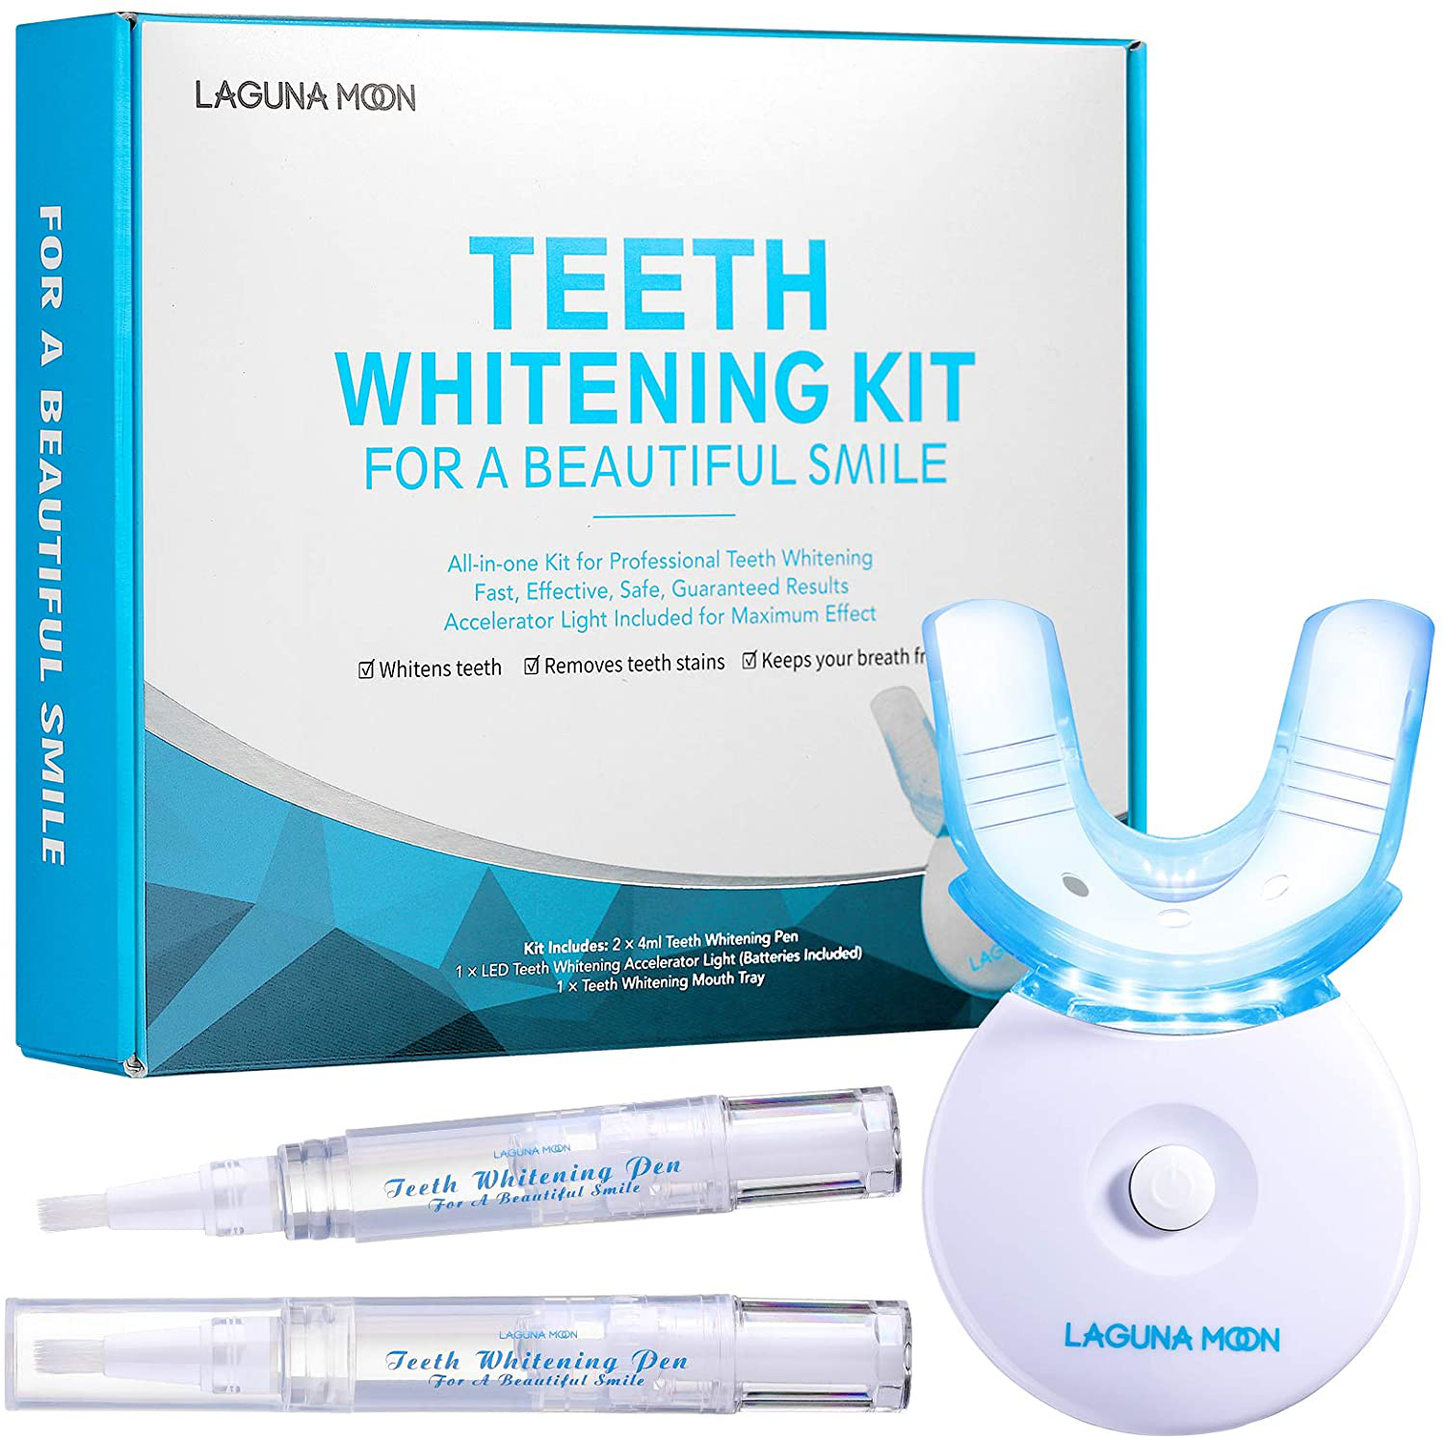 Teeth Whitening Kit with LED Light, 35% Urea Peroxide Teeth Whitening Gel, Mouth Tray, Wireless Teeth Whitening LED Light Helps Remove Stains from Coffee, Wine, Tea, No Sensitivity